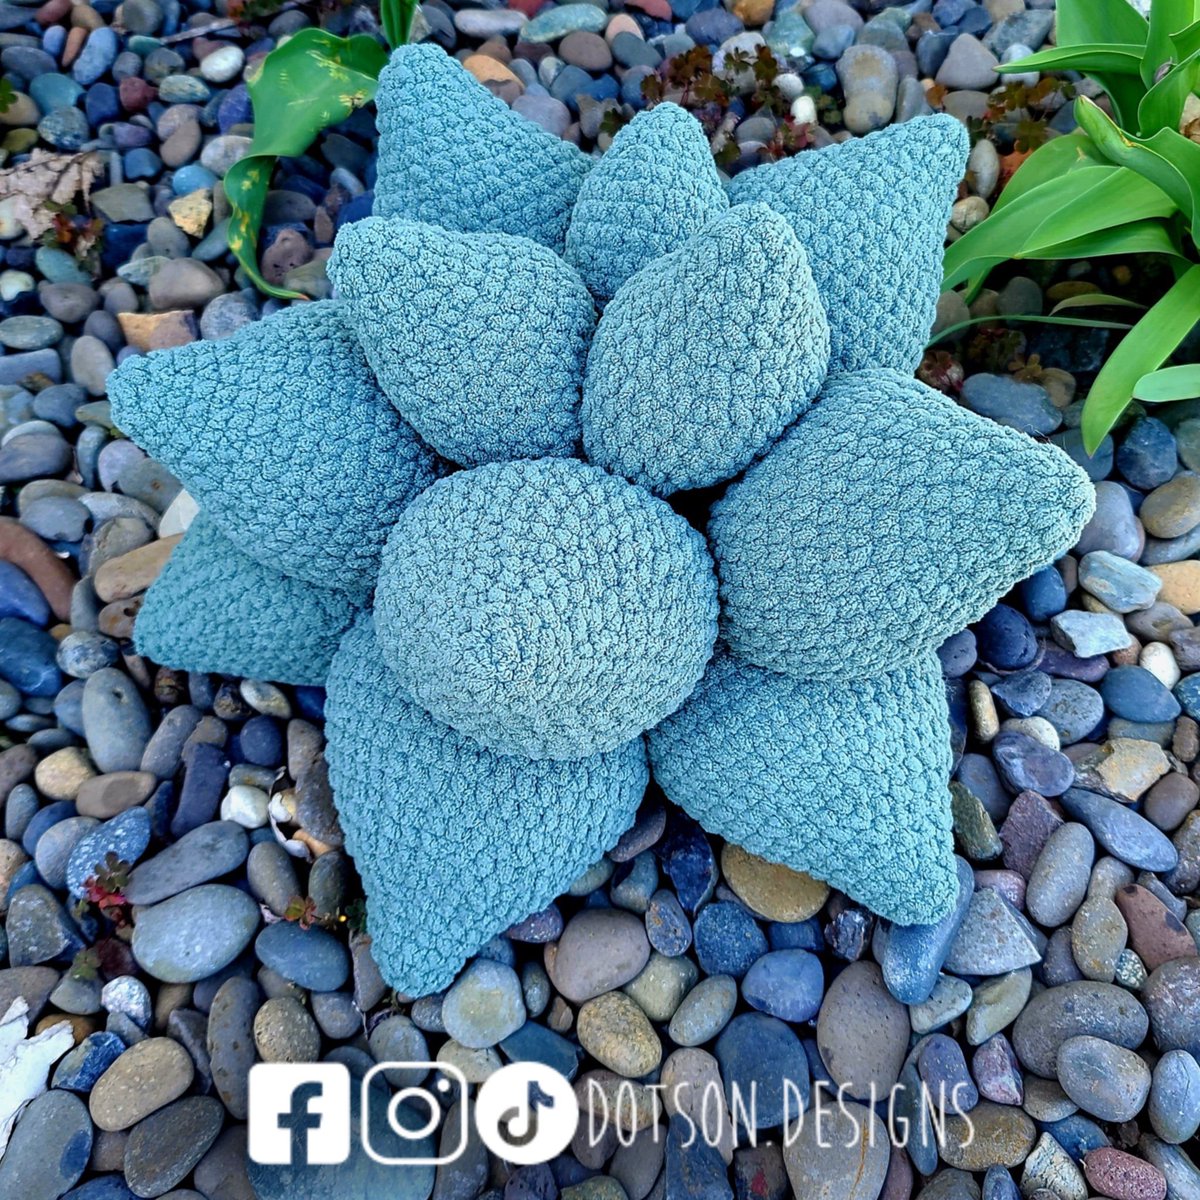 2 weeks and 3 skeins of yarn later I finally finished my succulent pillow and im OBSESSED 🪴

Pattern by lanarumi.crochet on Etsy

#succulent #plant #plantsmakepeoplehappy #crochetersofinstagram #crochetaddict #crochet #crocheting #amigirumi #pillow #handmade #plants #spring